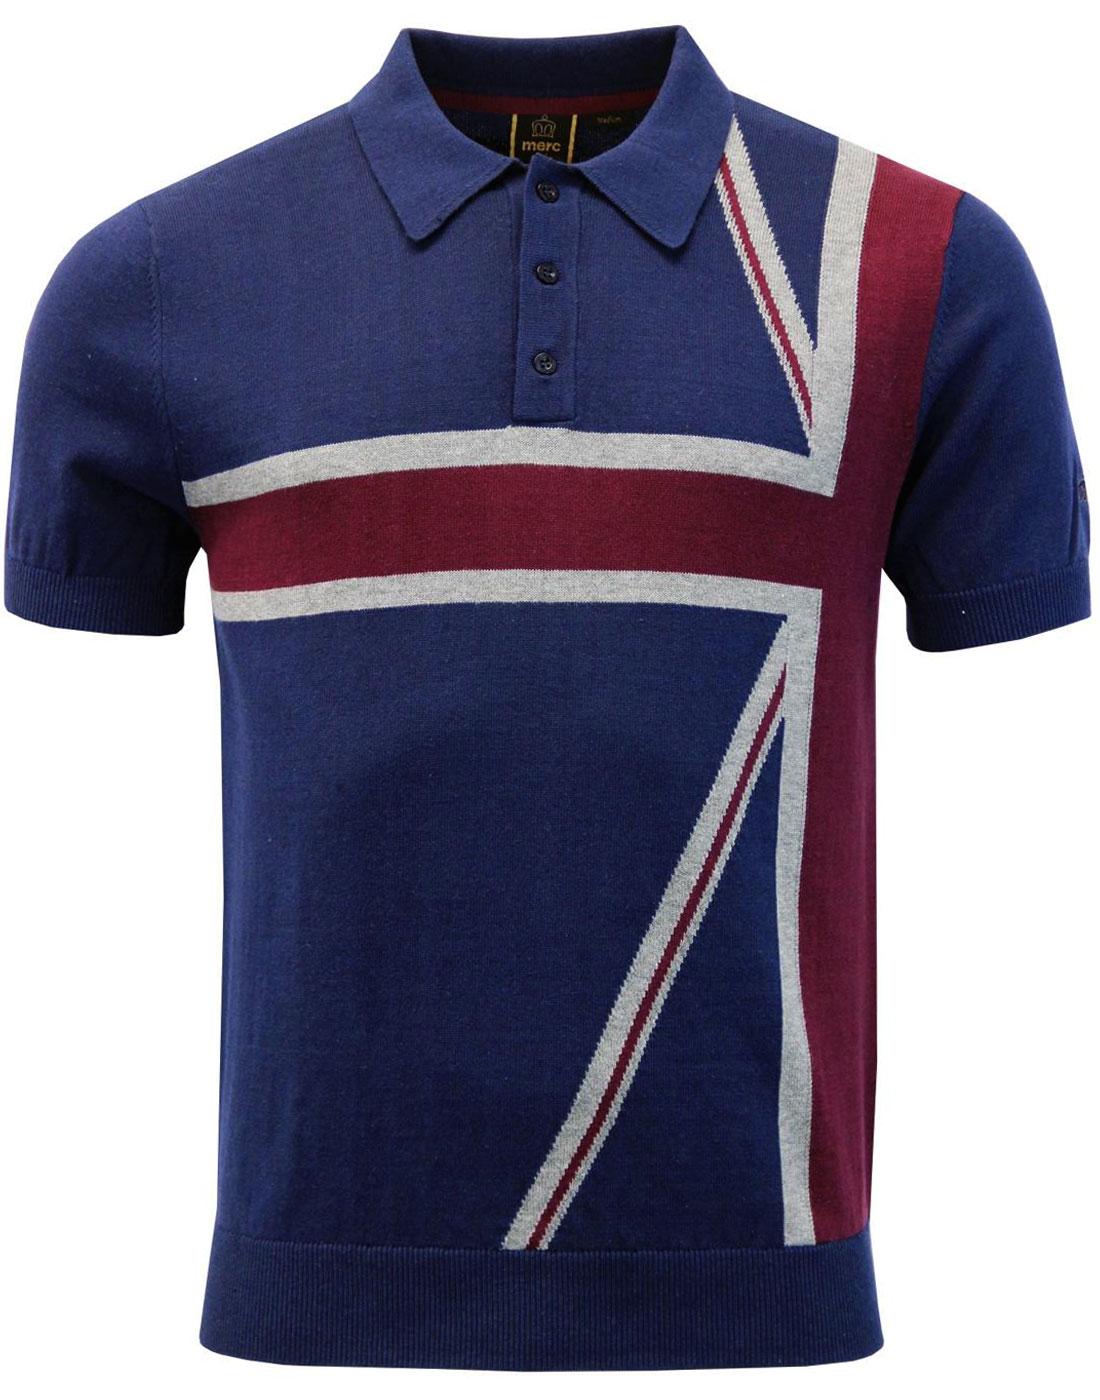 MERC Castle Retro 1960s Mod Union Jack Knitted Polo Shirt in Navy